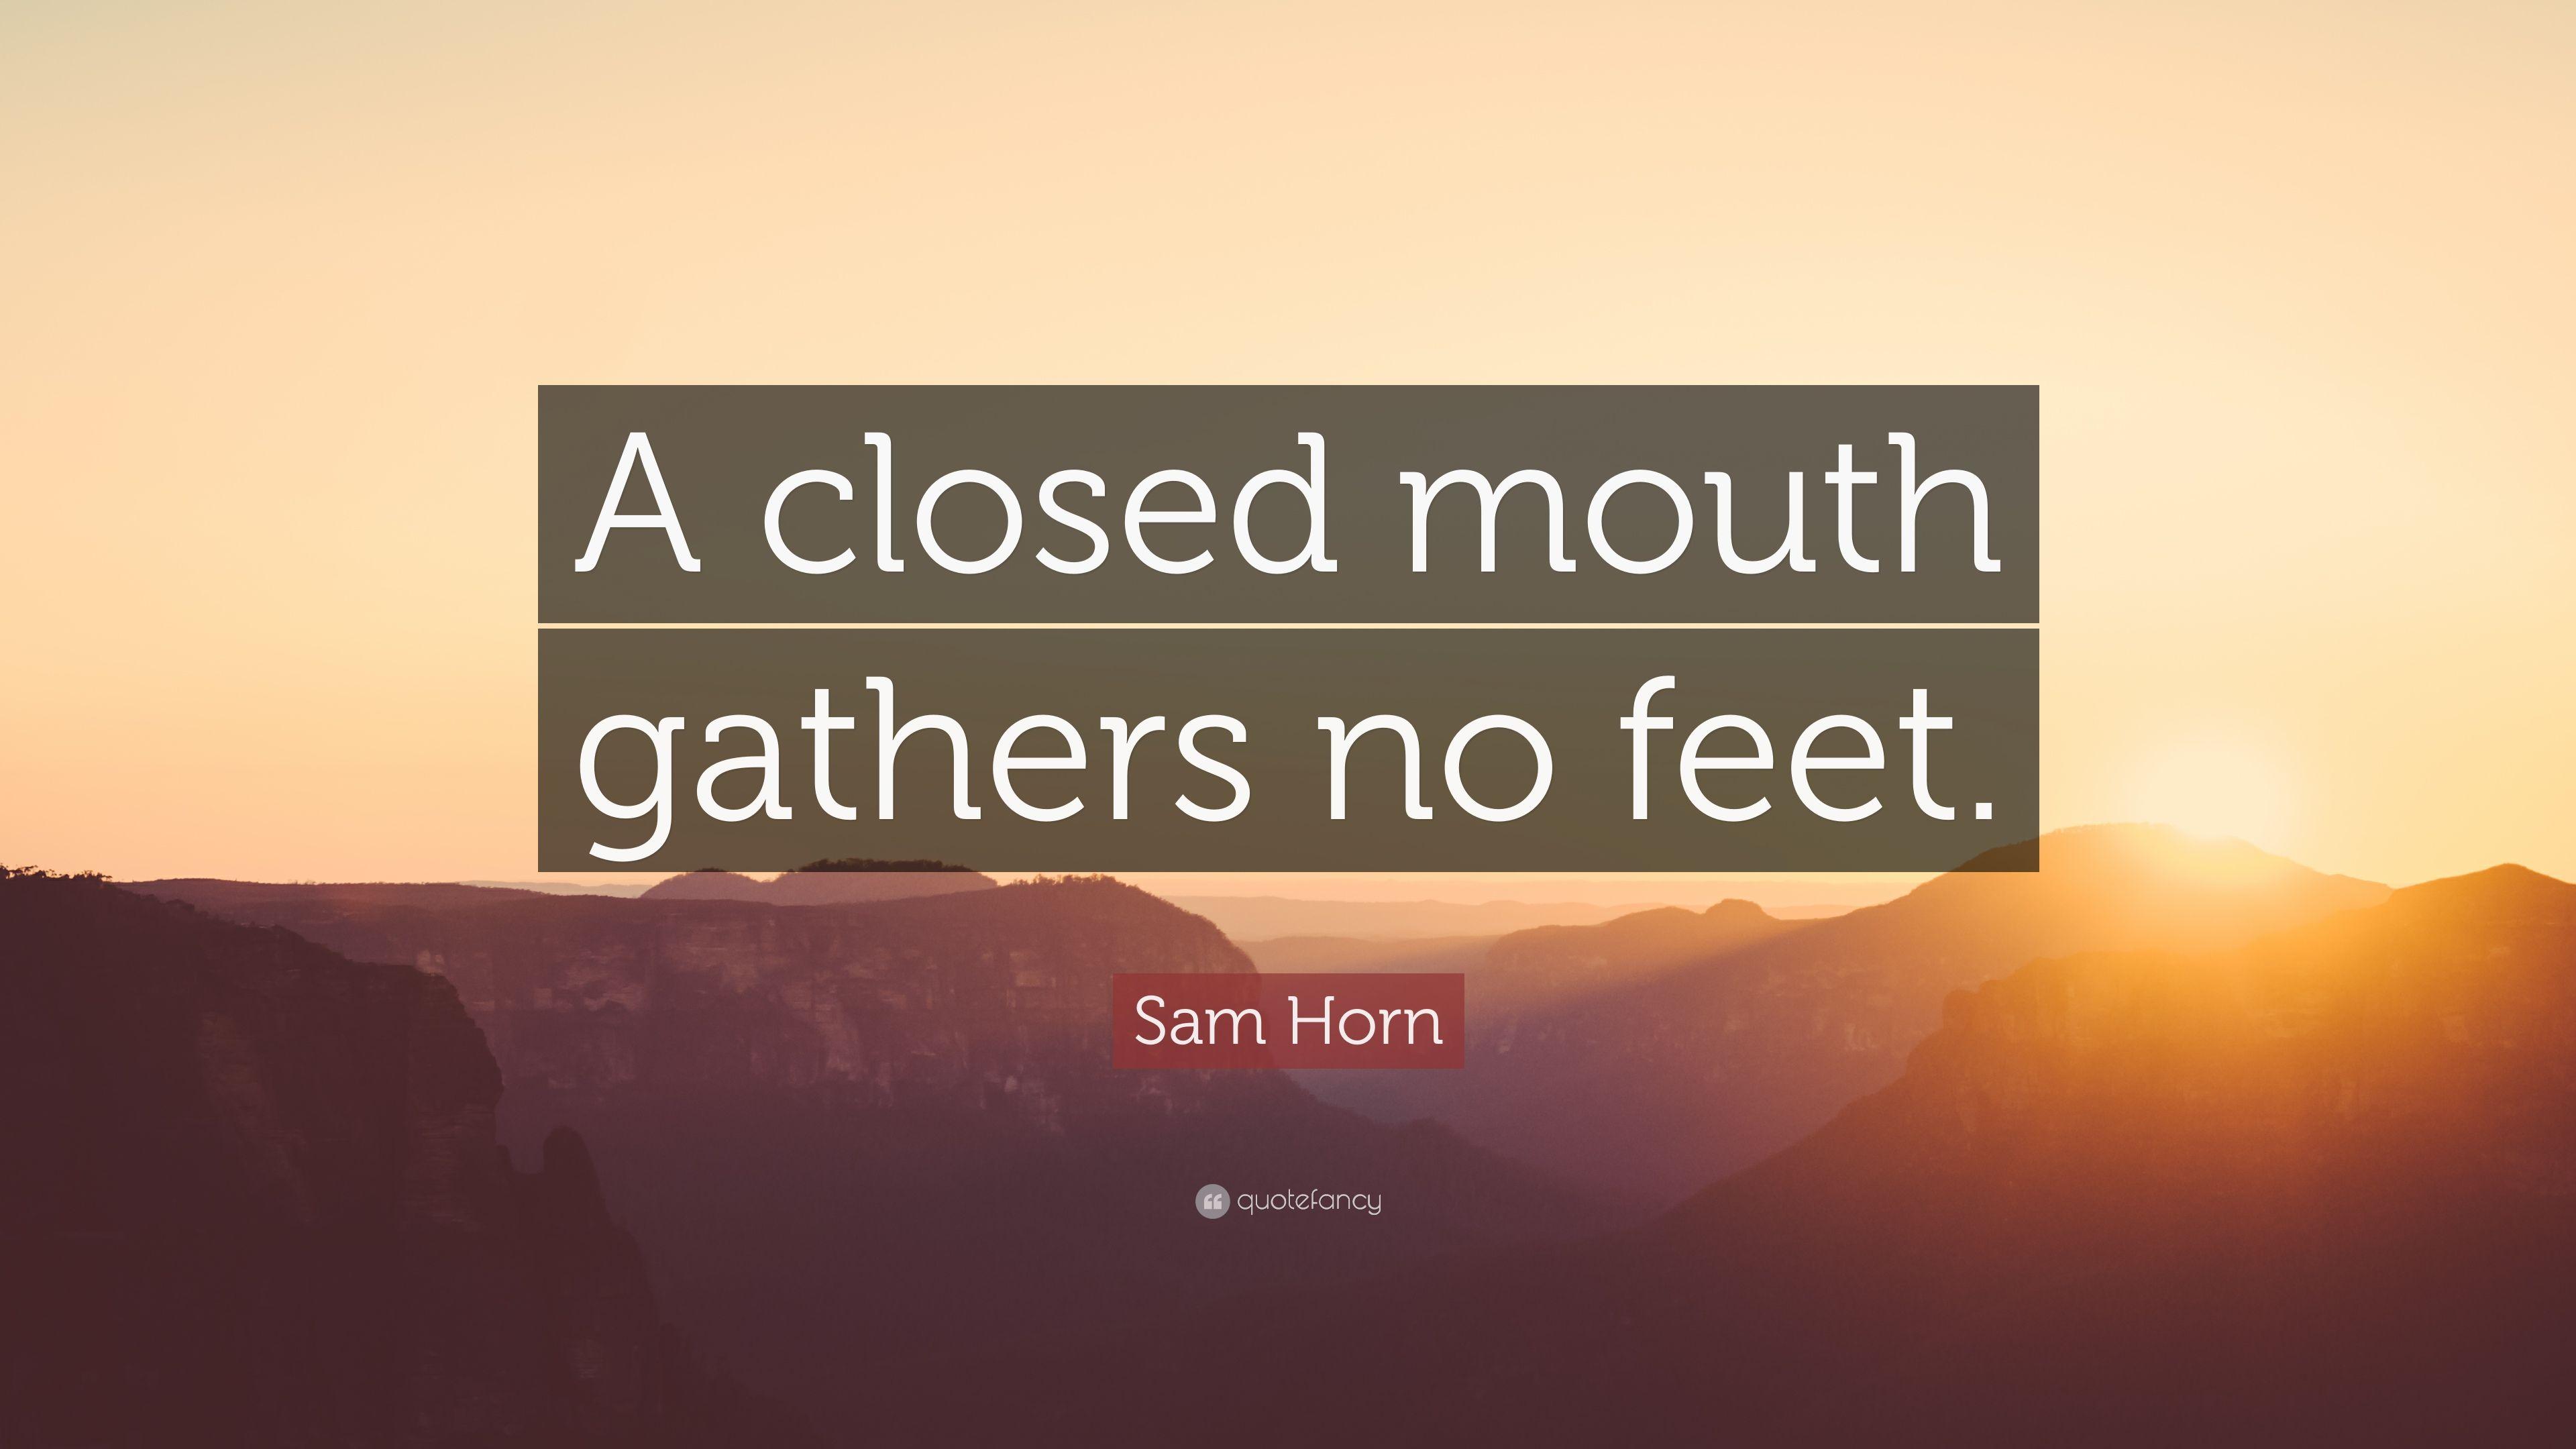 Sam Horn Quote: “A closed mouth gathers no feet.” 7 wallpaper